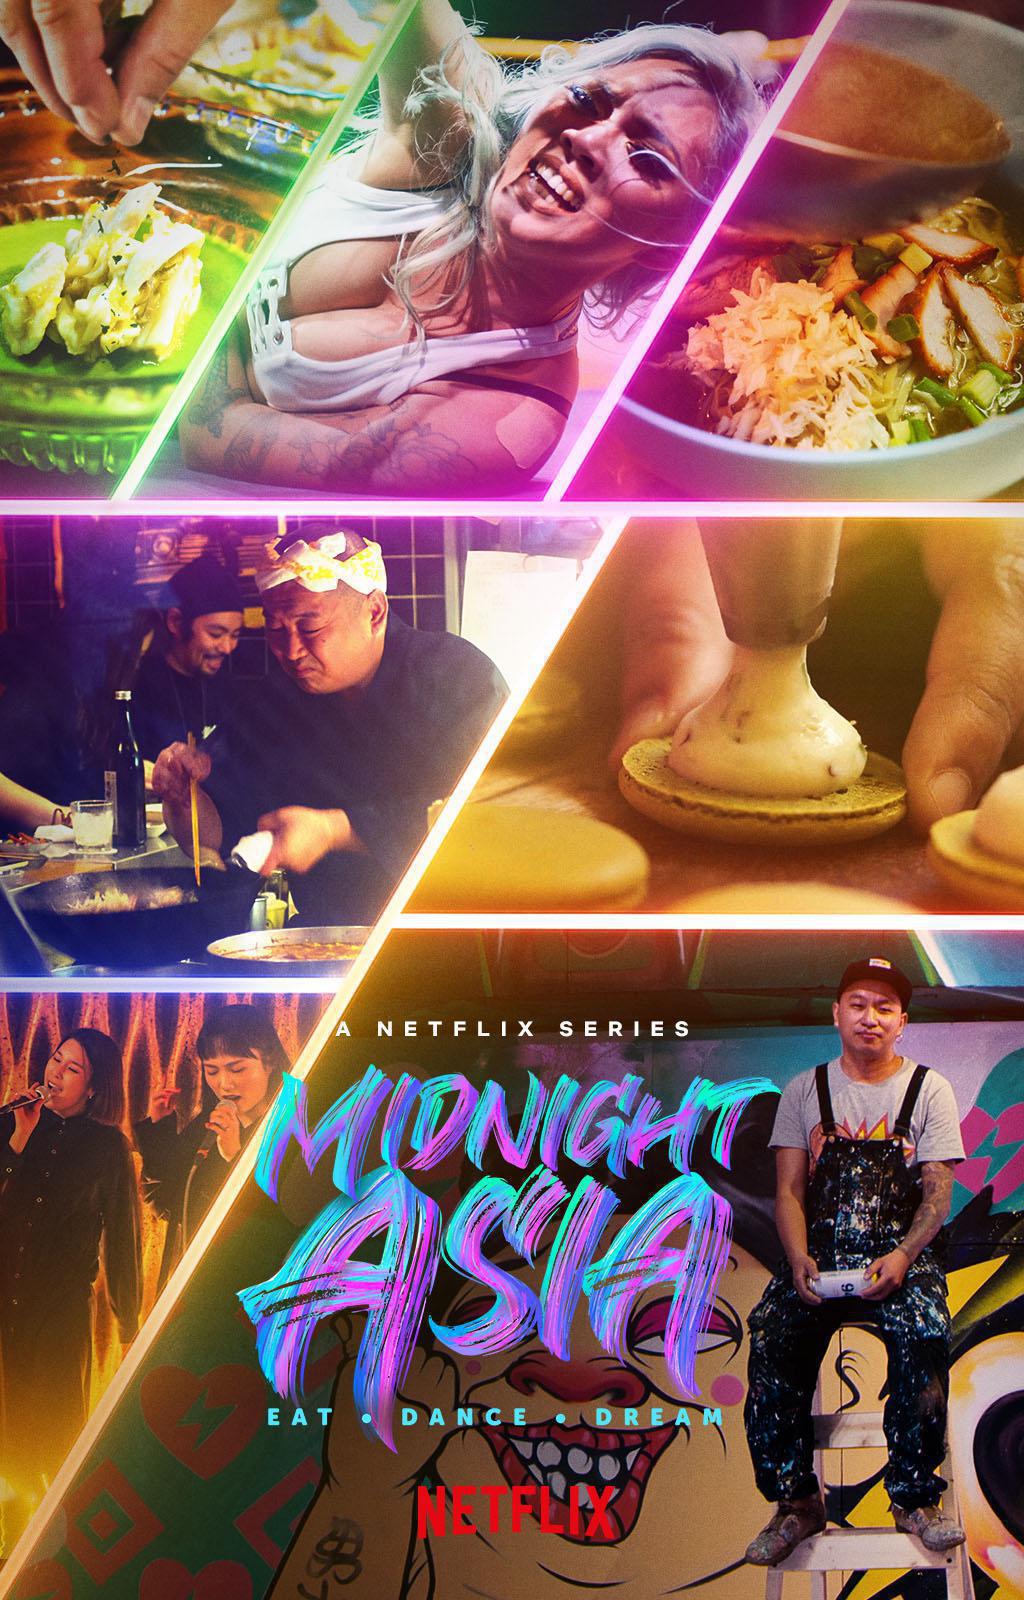 TV ratings for Midnight Asia: Eat Dance Dream in Mexico. Netflix TV series